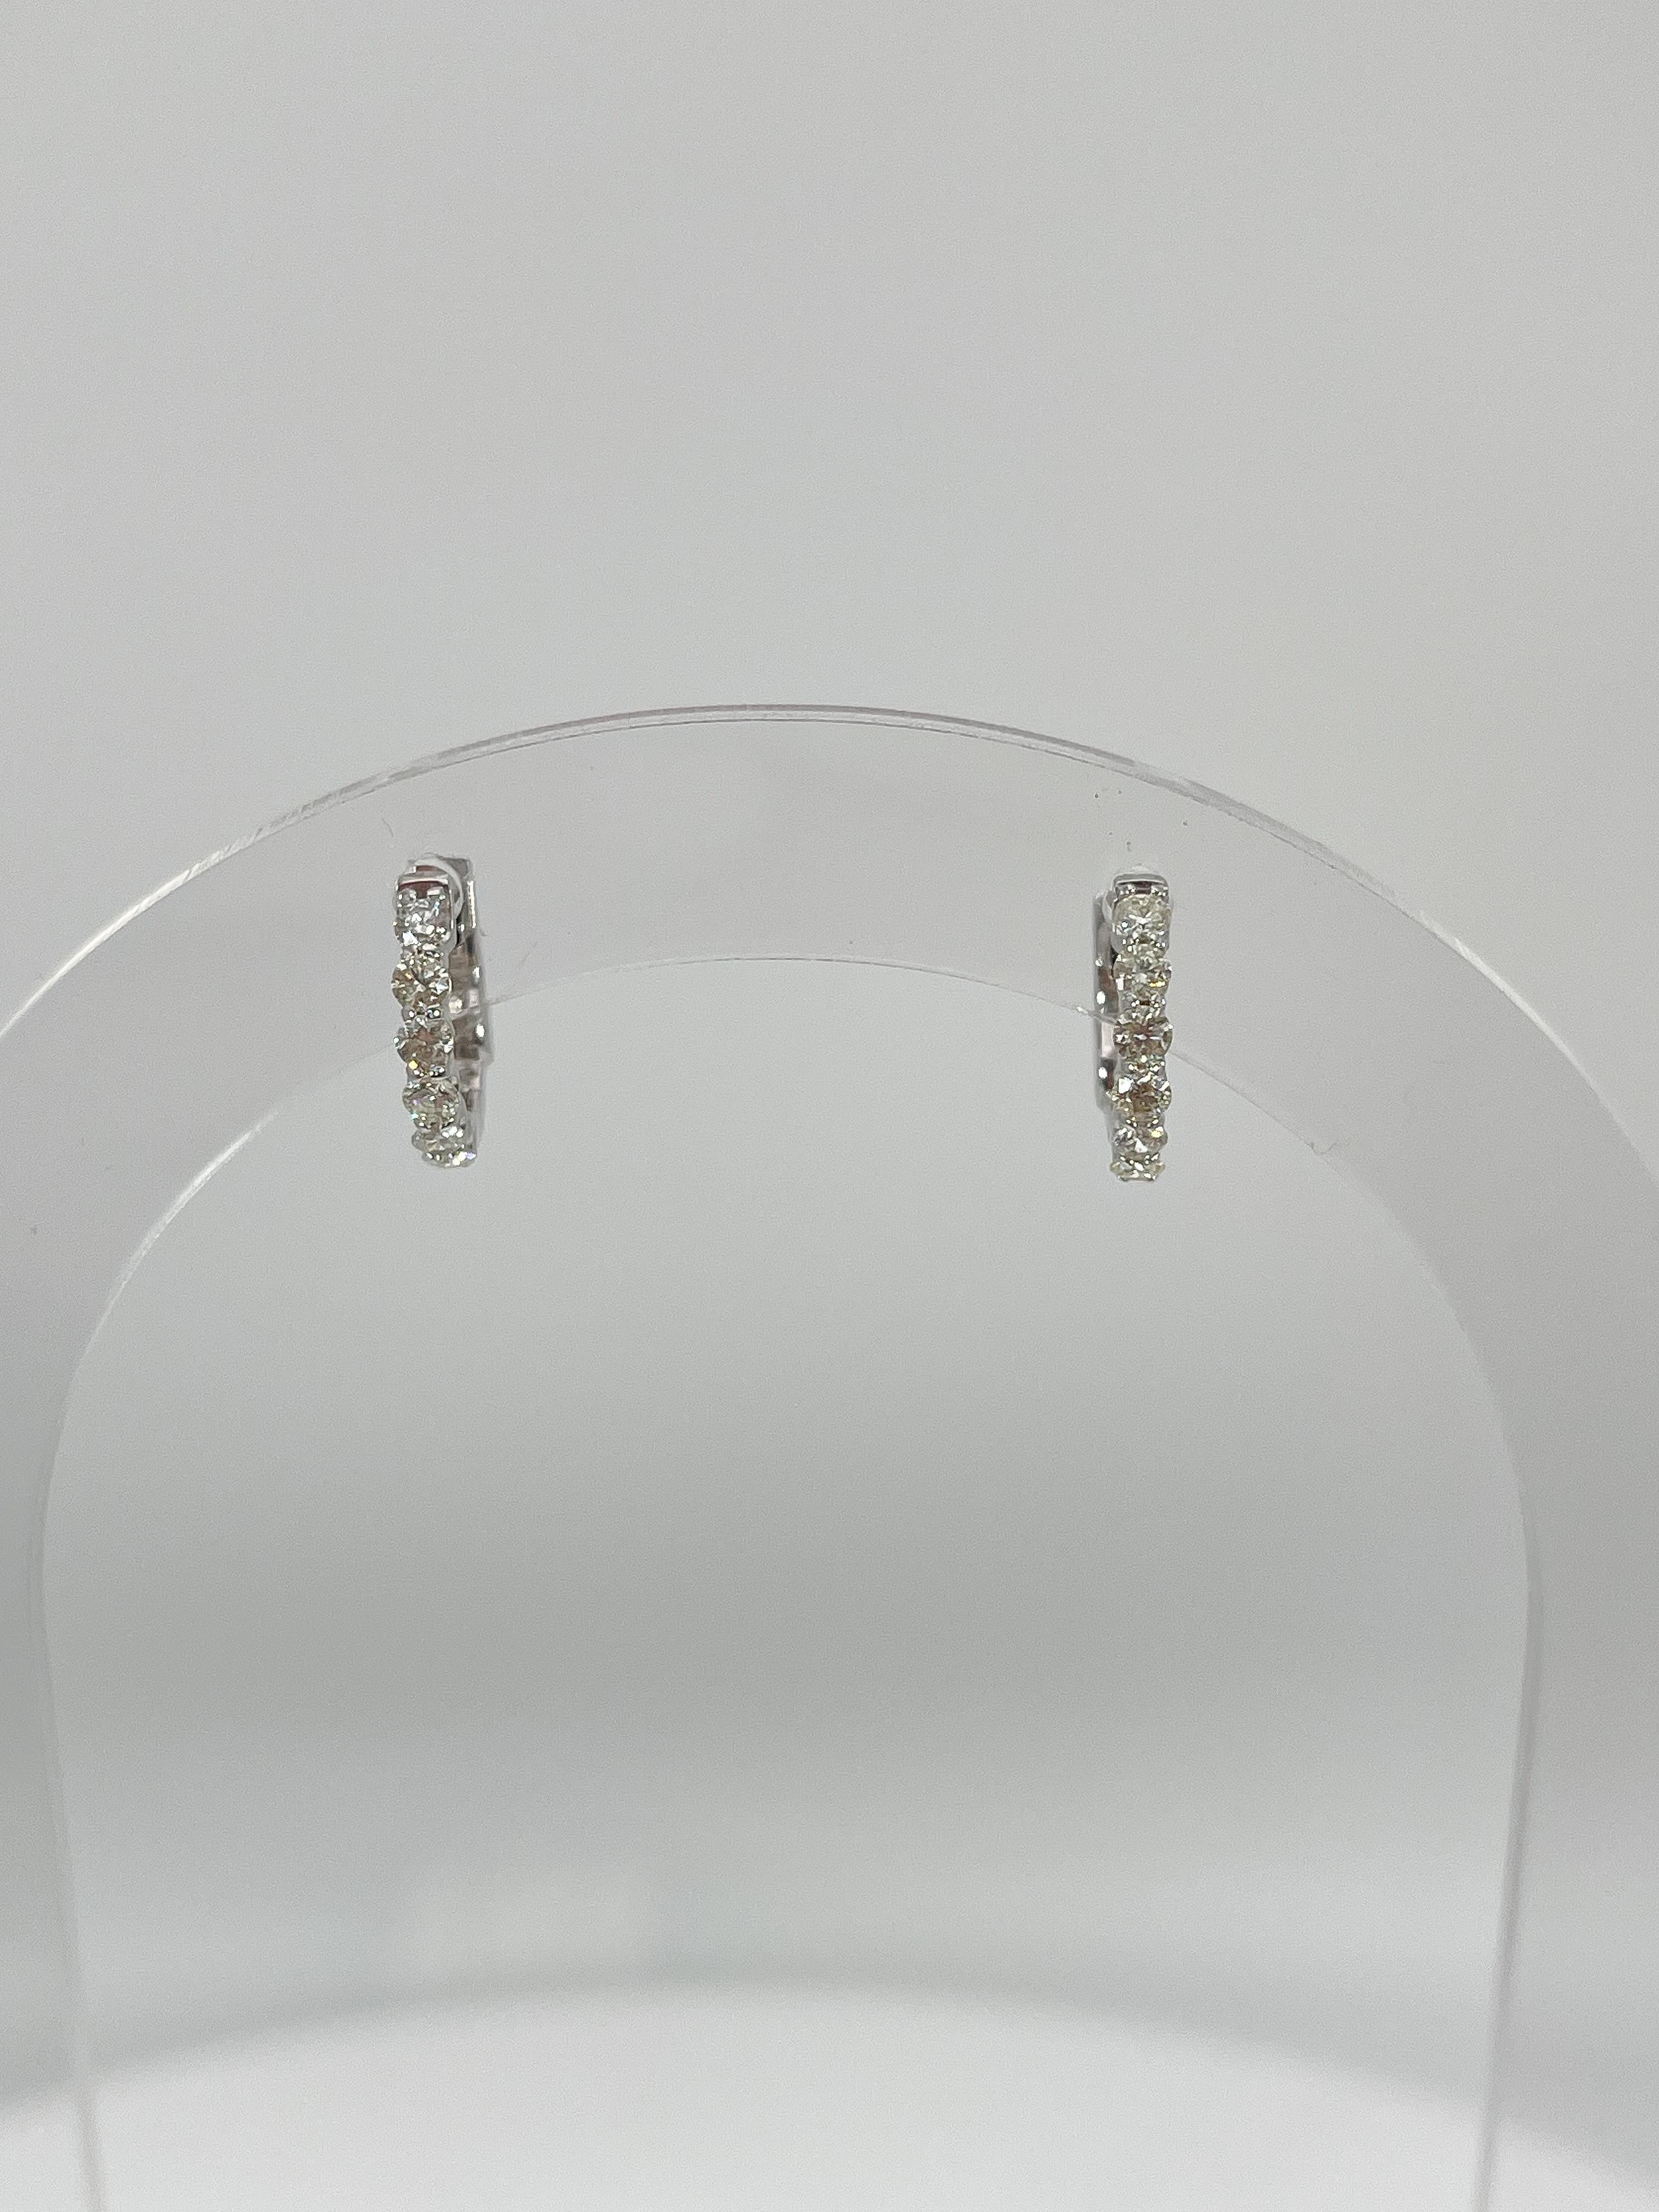 14k white gold .47 CTW diamond huggie hoop earrings. All the diamonds in these earrings are round, they have measurements of 12mm x 2 mm, they have a safety clasp to open and close earrings, and they have a total weight of 2.3 grams.